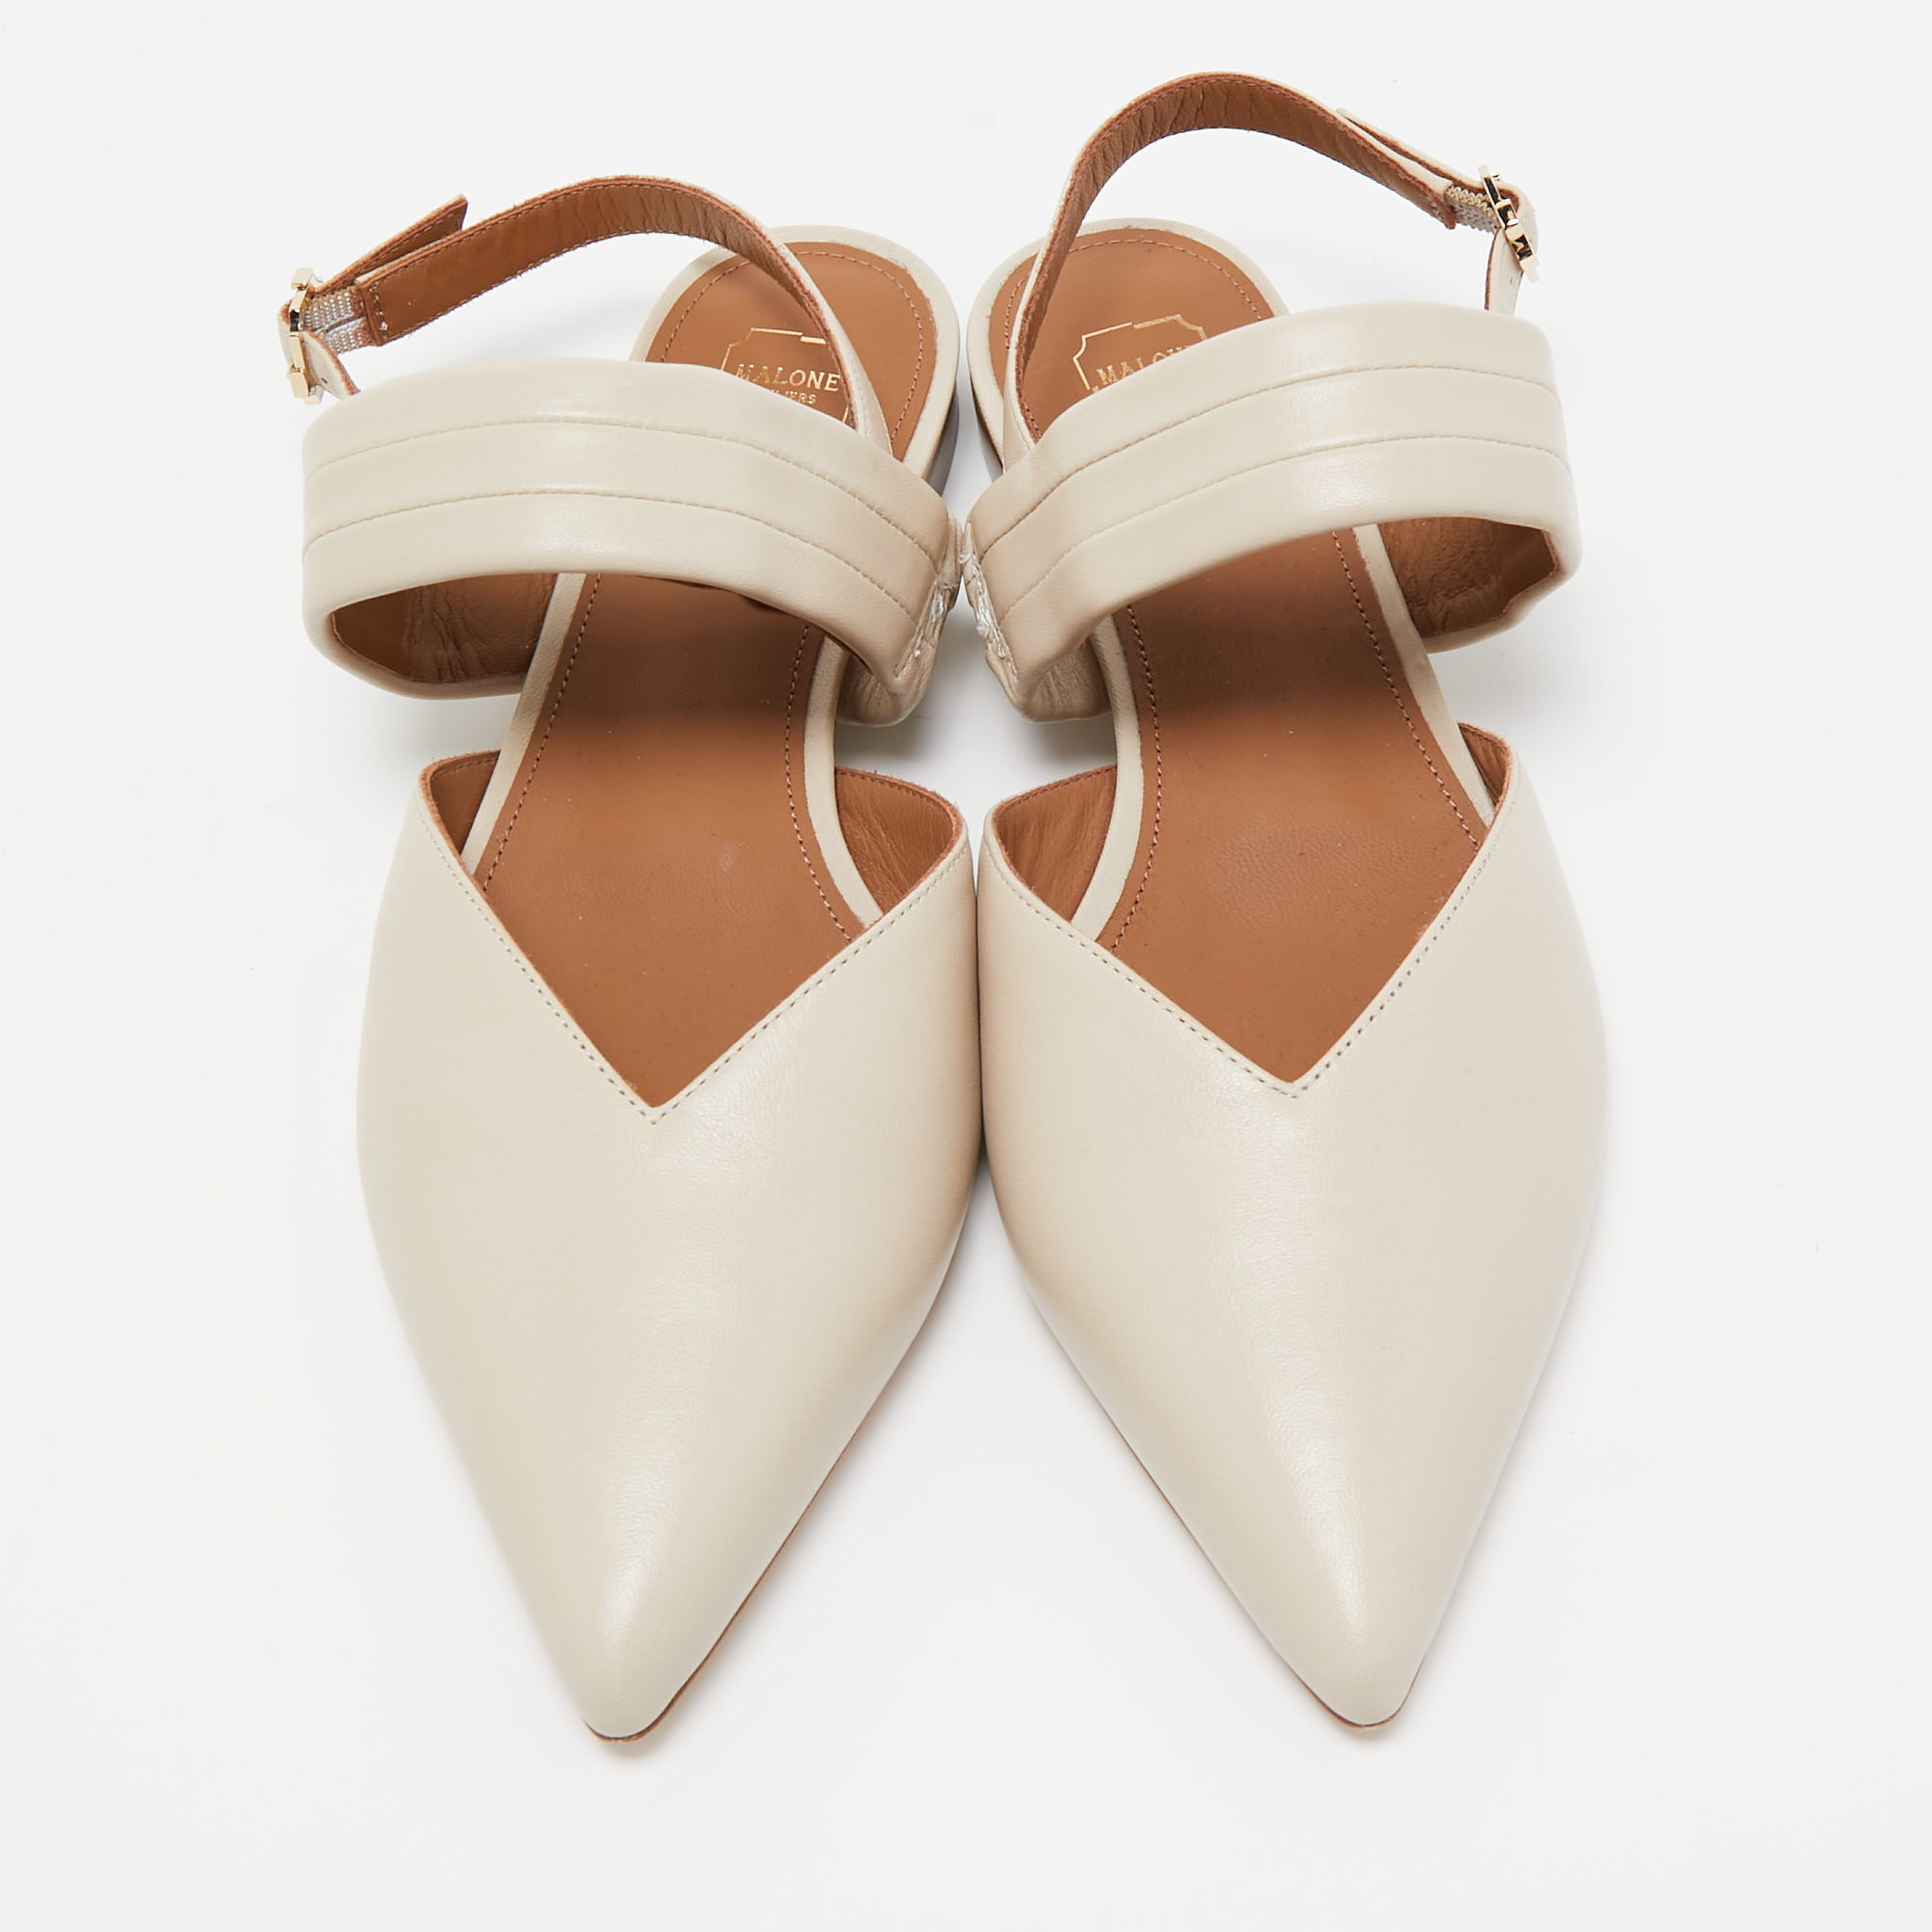 Malone Souliers Cream Leather Maisie Slingback Flats Size 36.5